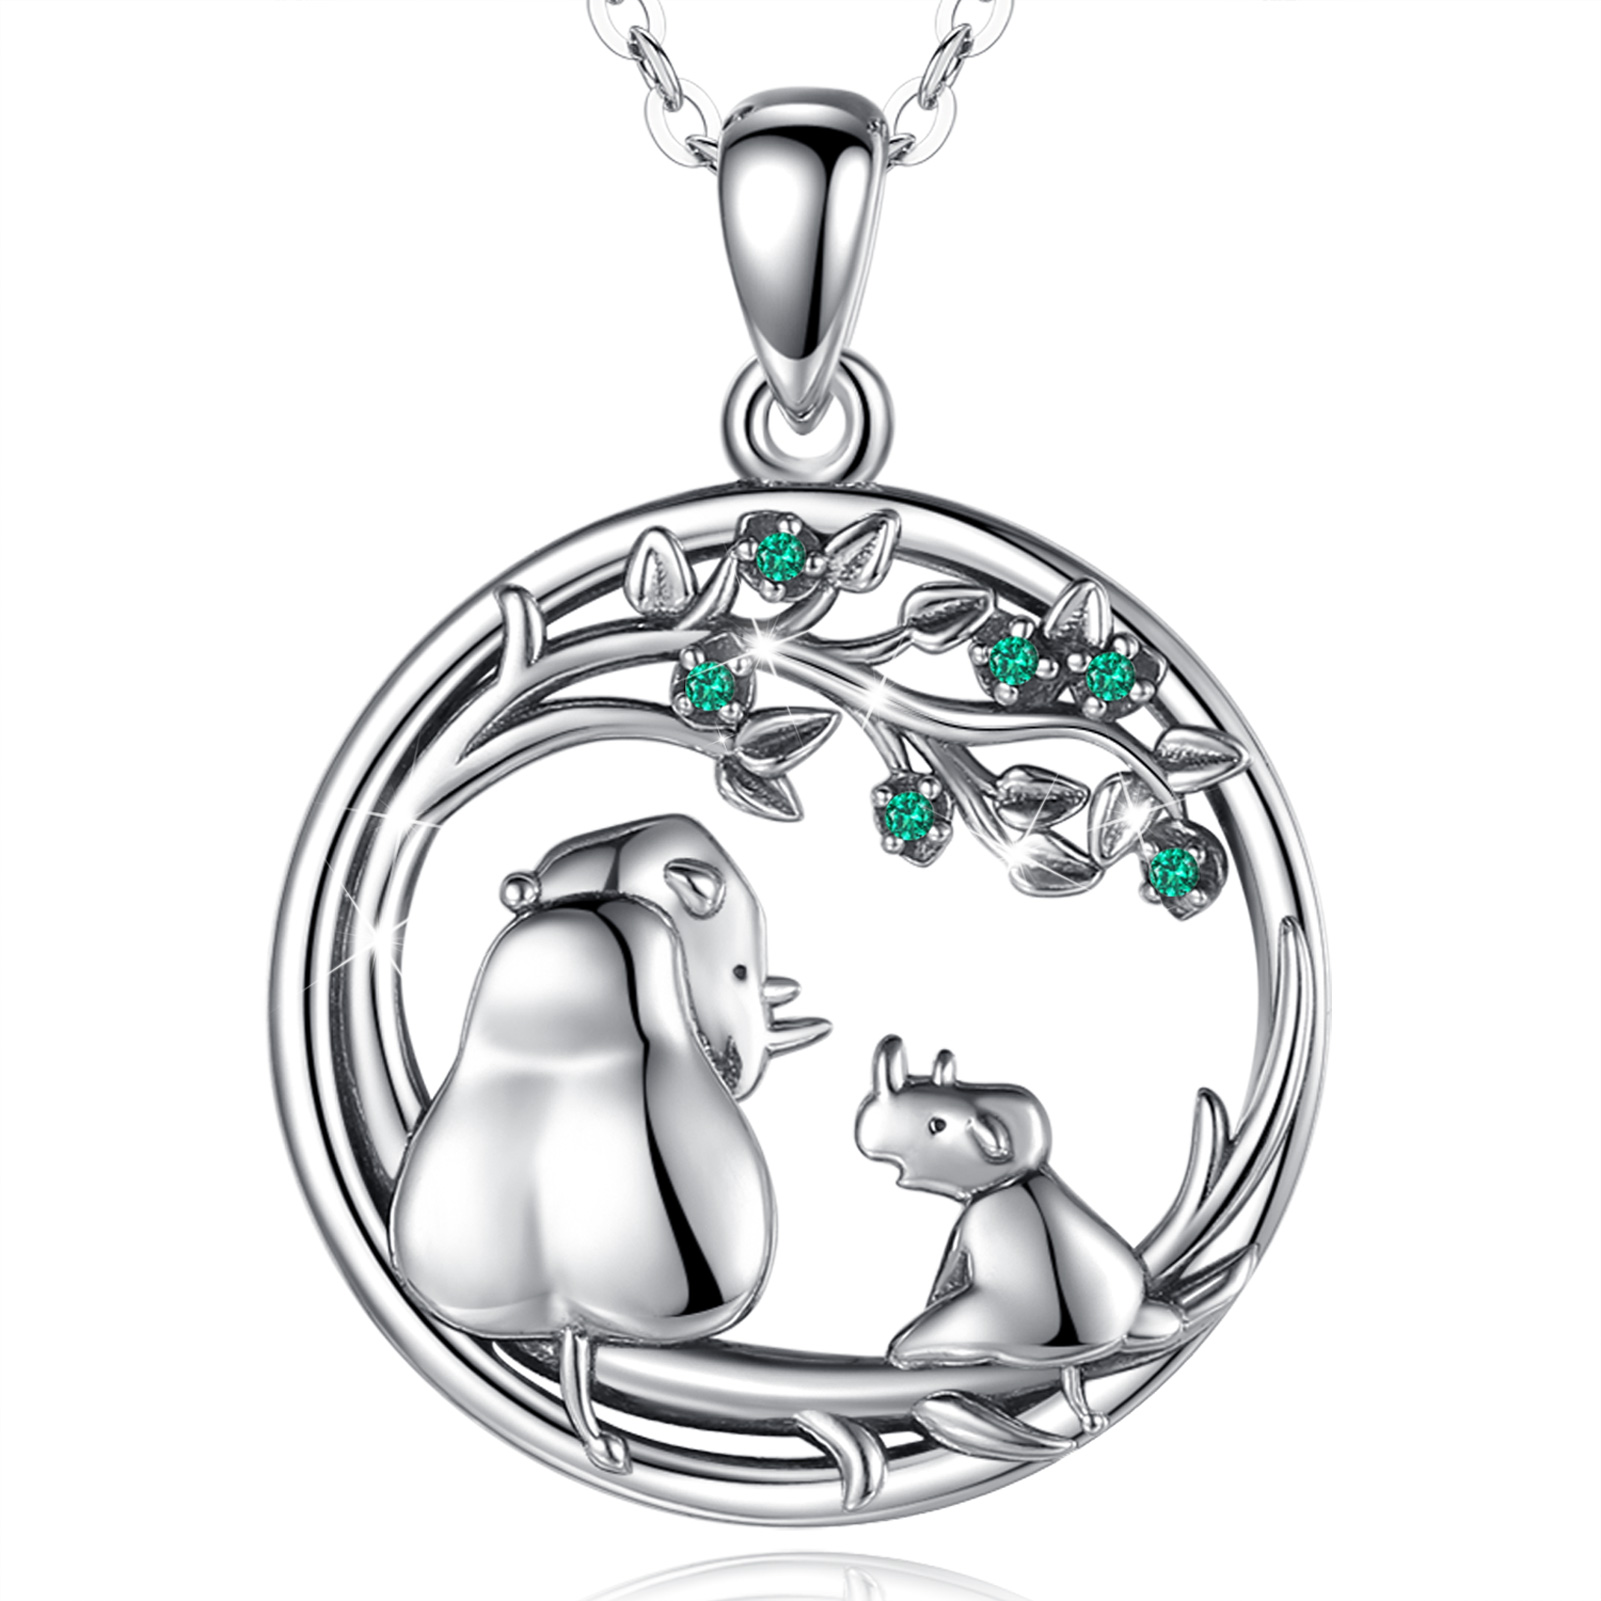 Merryshine Jewelry S925 Sterling Silver Cute Animal Rhino Design Mother's Day Gift Baby Mom Necklace